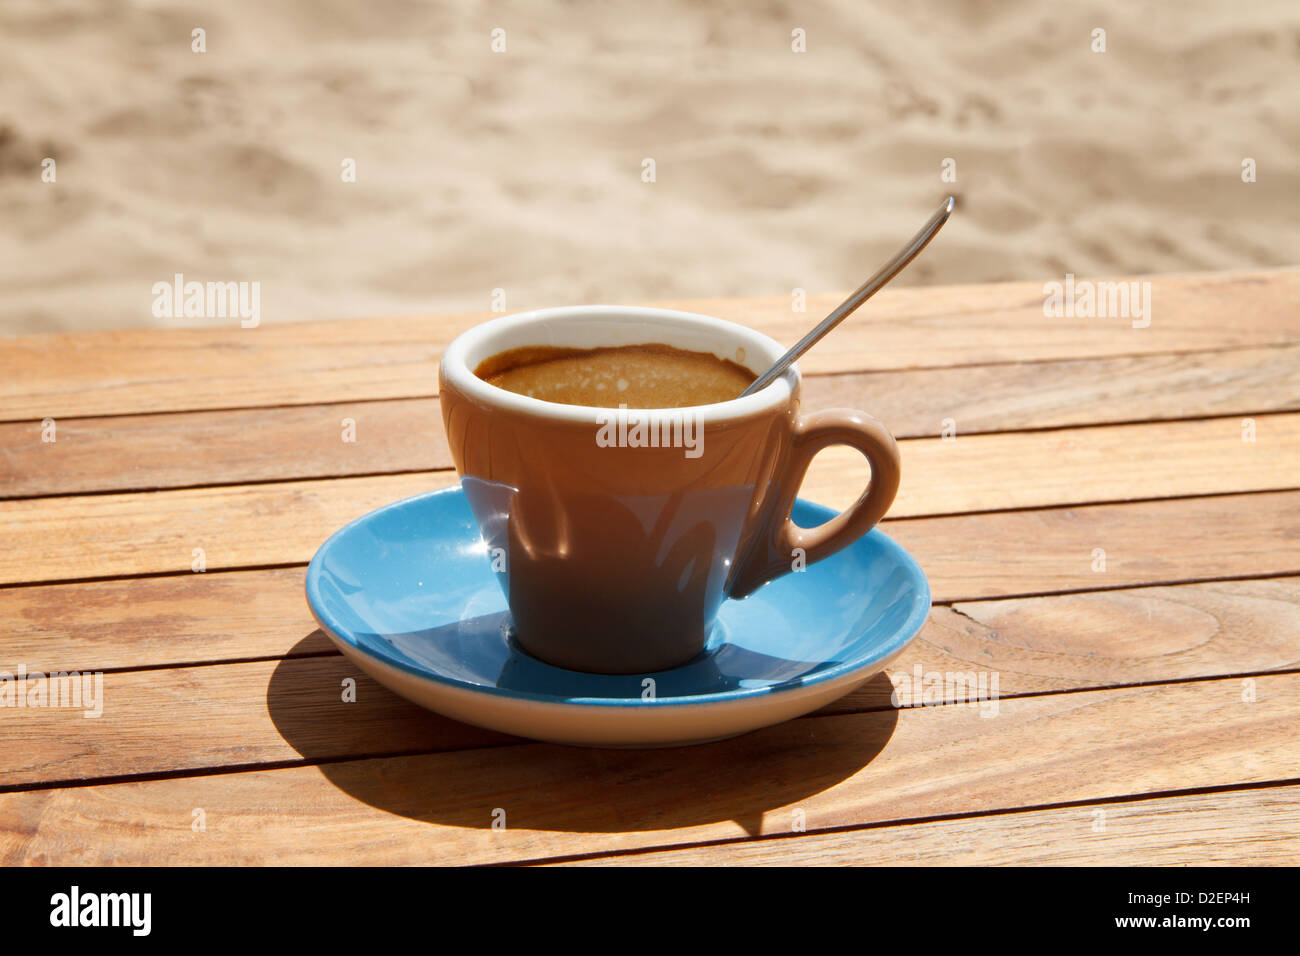 A cup of coffee on a wooden table. Stock Photo